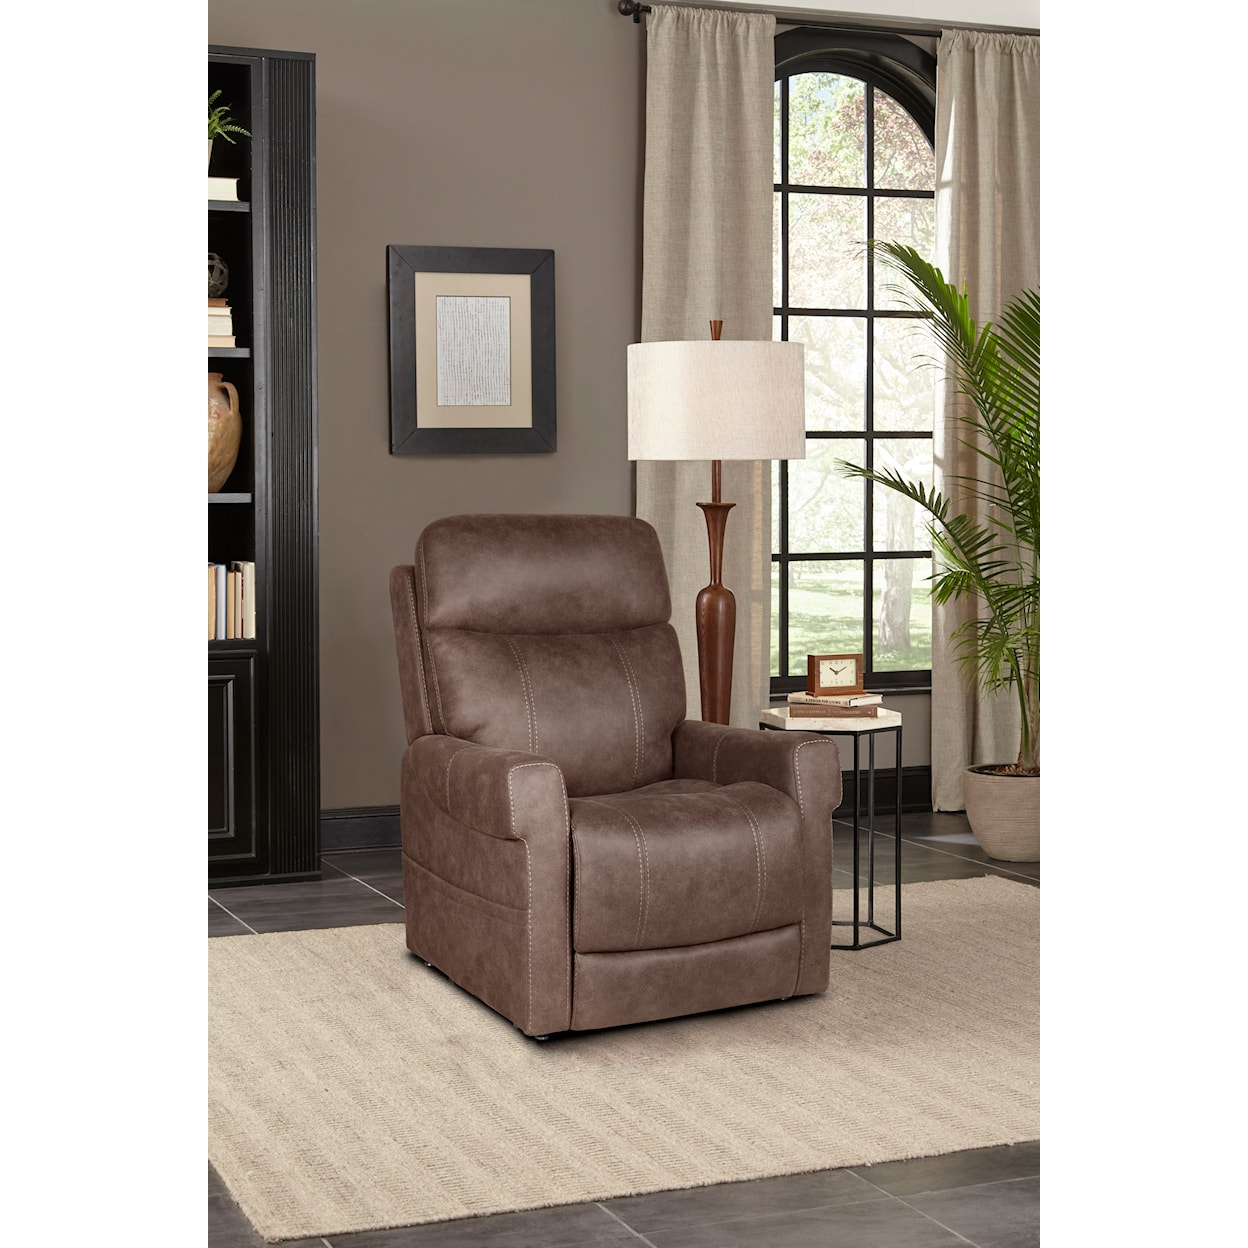 Moto Motion Canyon Lift Recliner with Massage